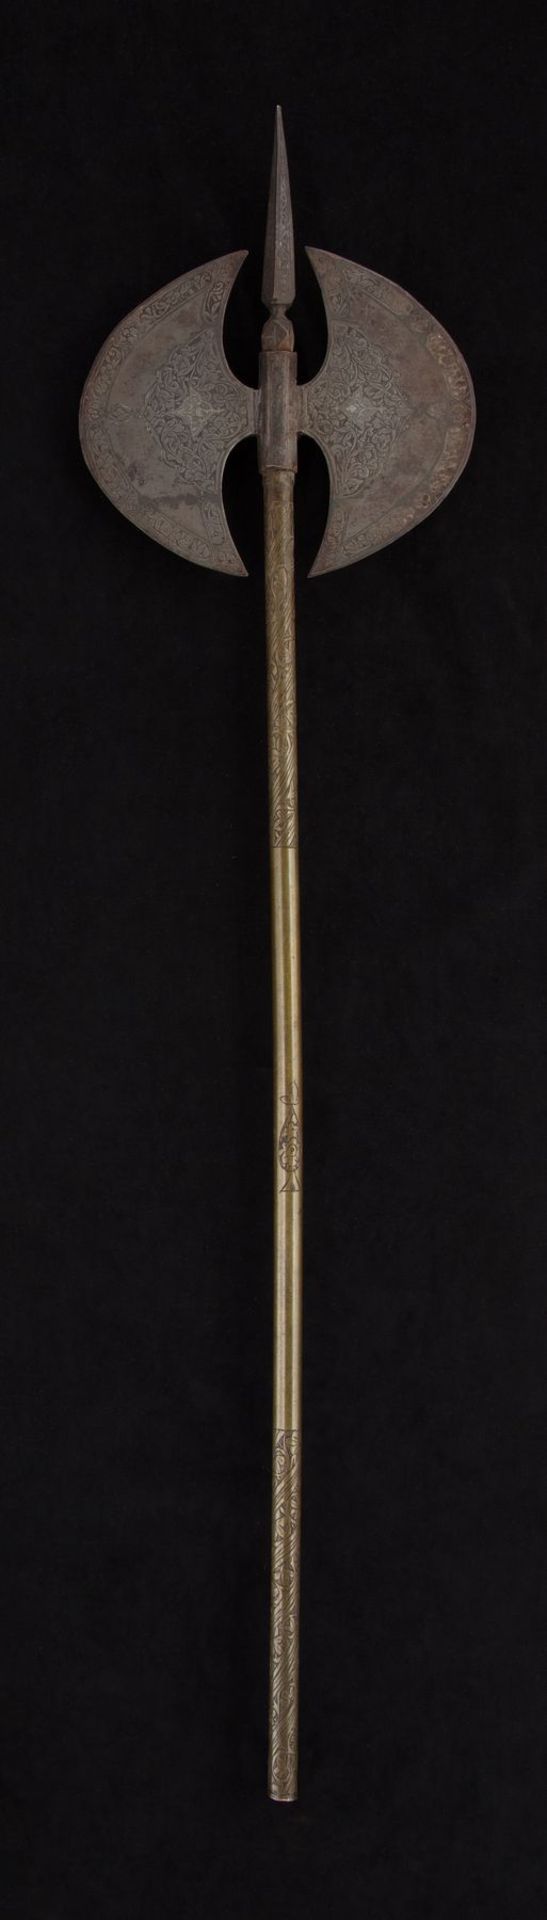 Indo-Persian ceremonial ax, based on the “Labrys” with a double blade. Overall [...]